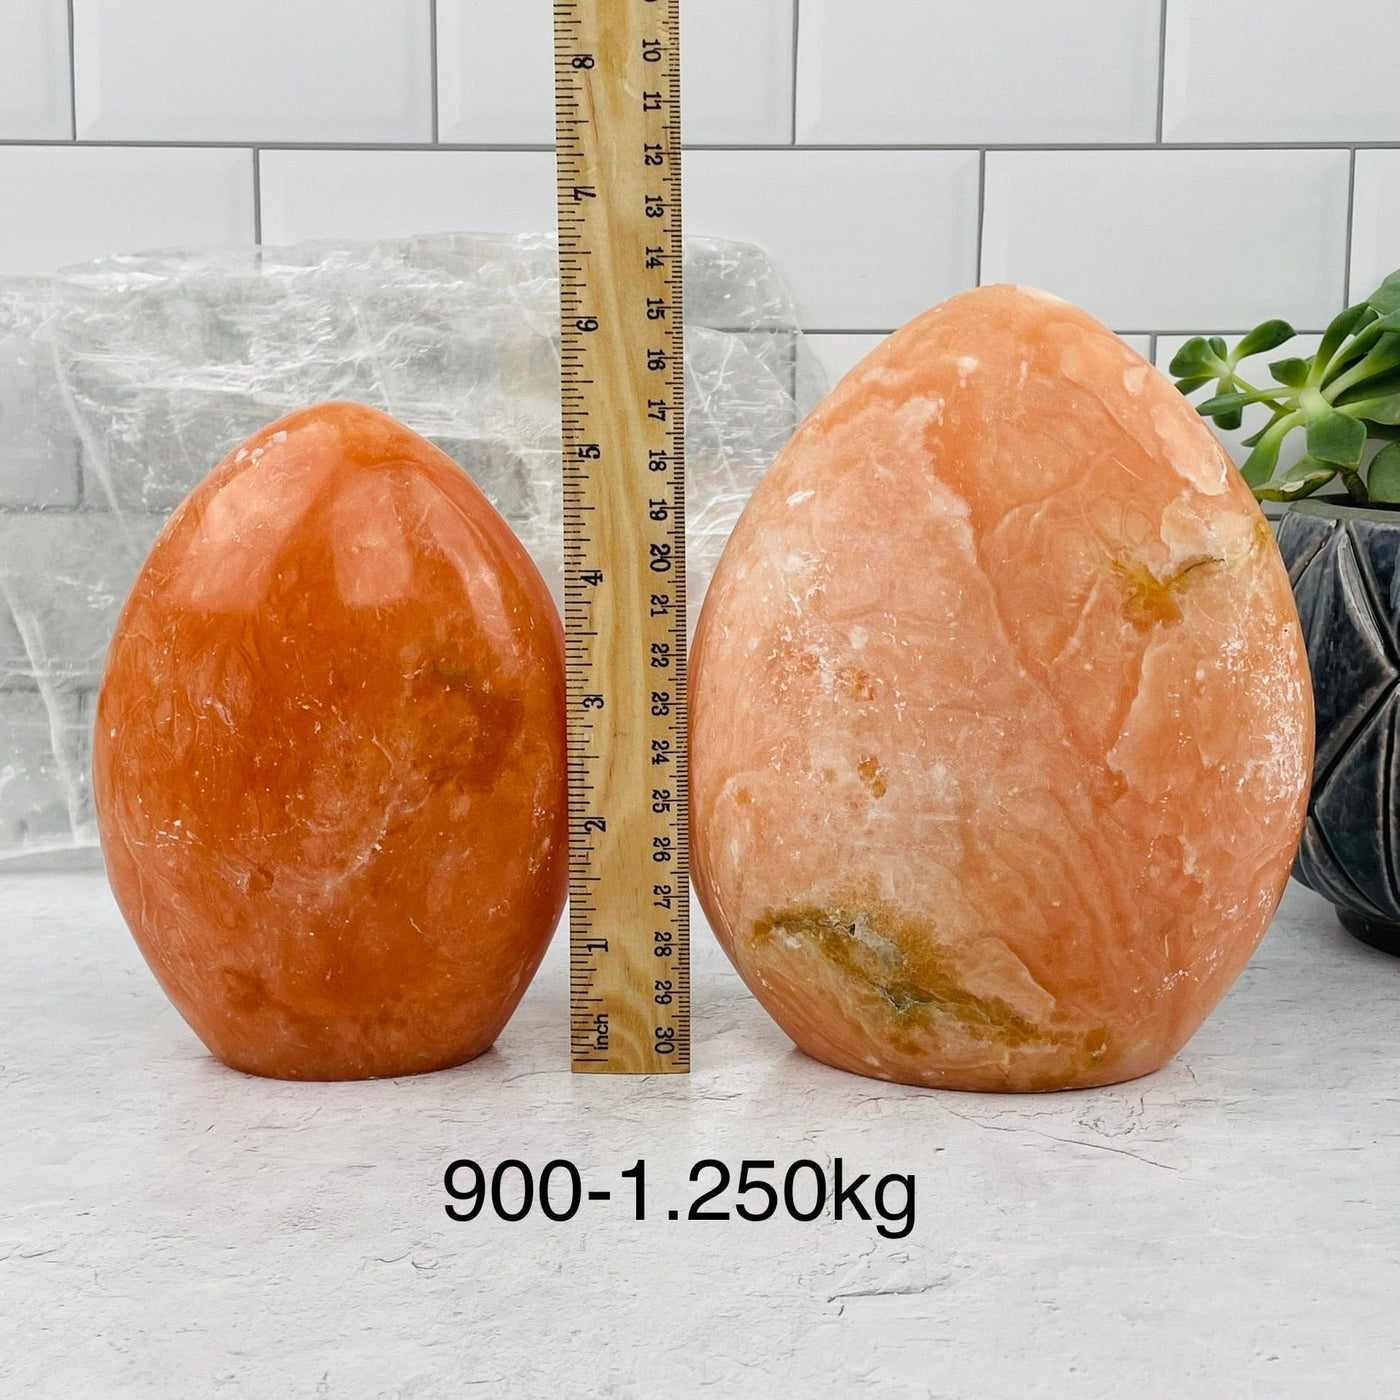 Peach Aventurine Cut Base sold by weight. displayed next to a ruler for size reference